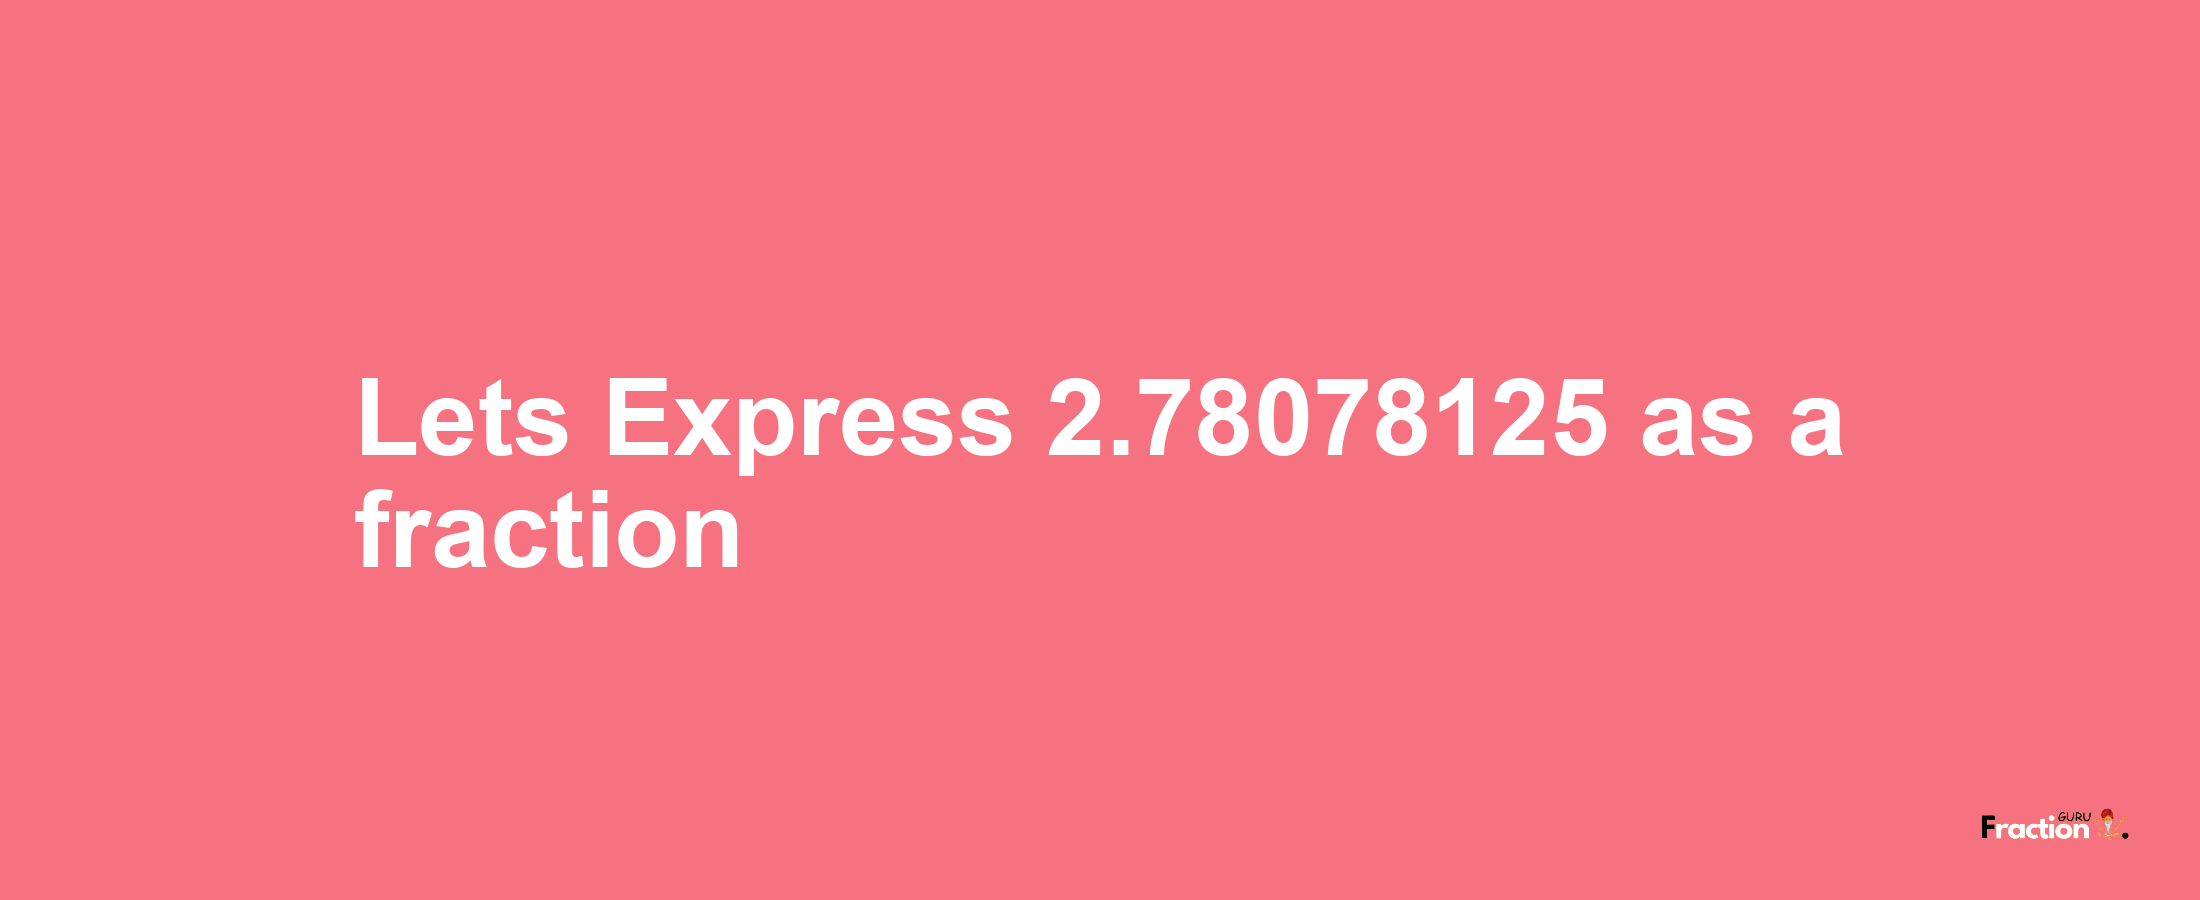 Lets Express 2.78078125 as afraction